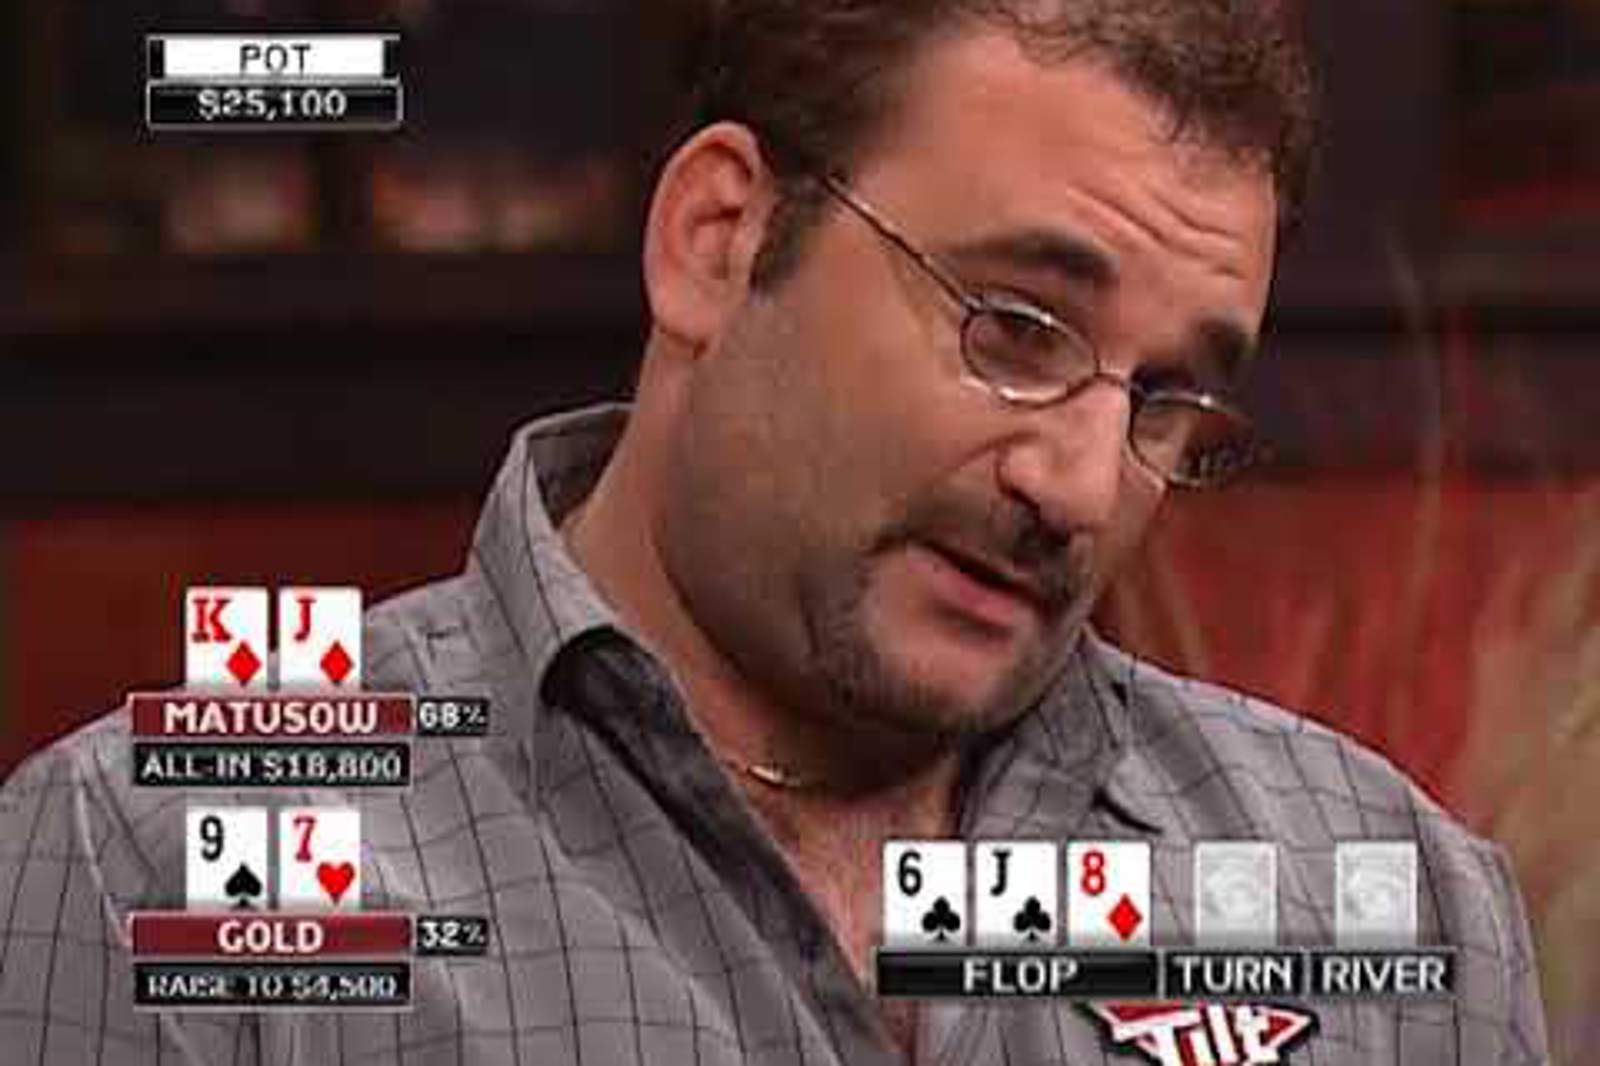 Throwback Hands: Mike Matusow Is Onboard the 'Persian Carpet Ride' on PokerGO